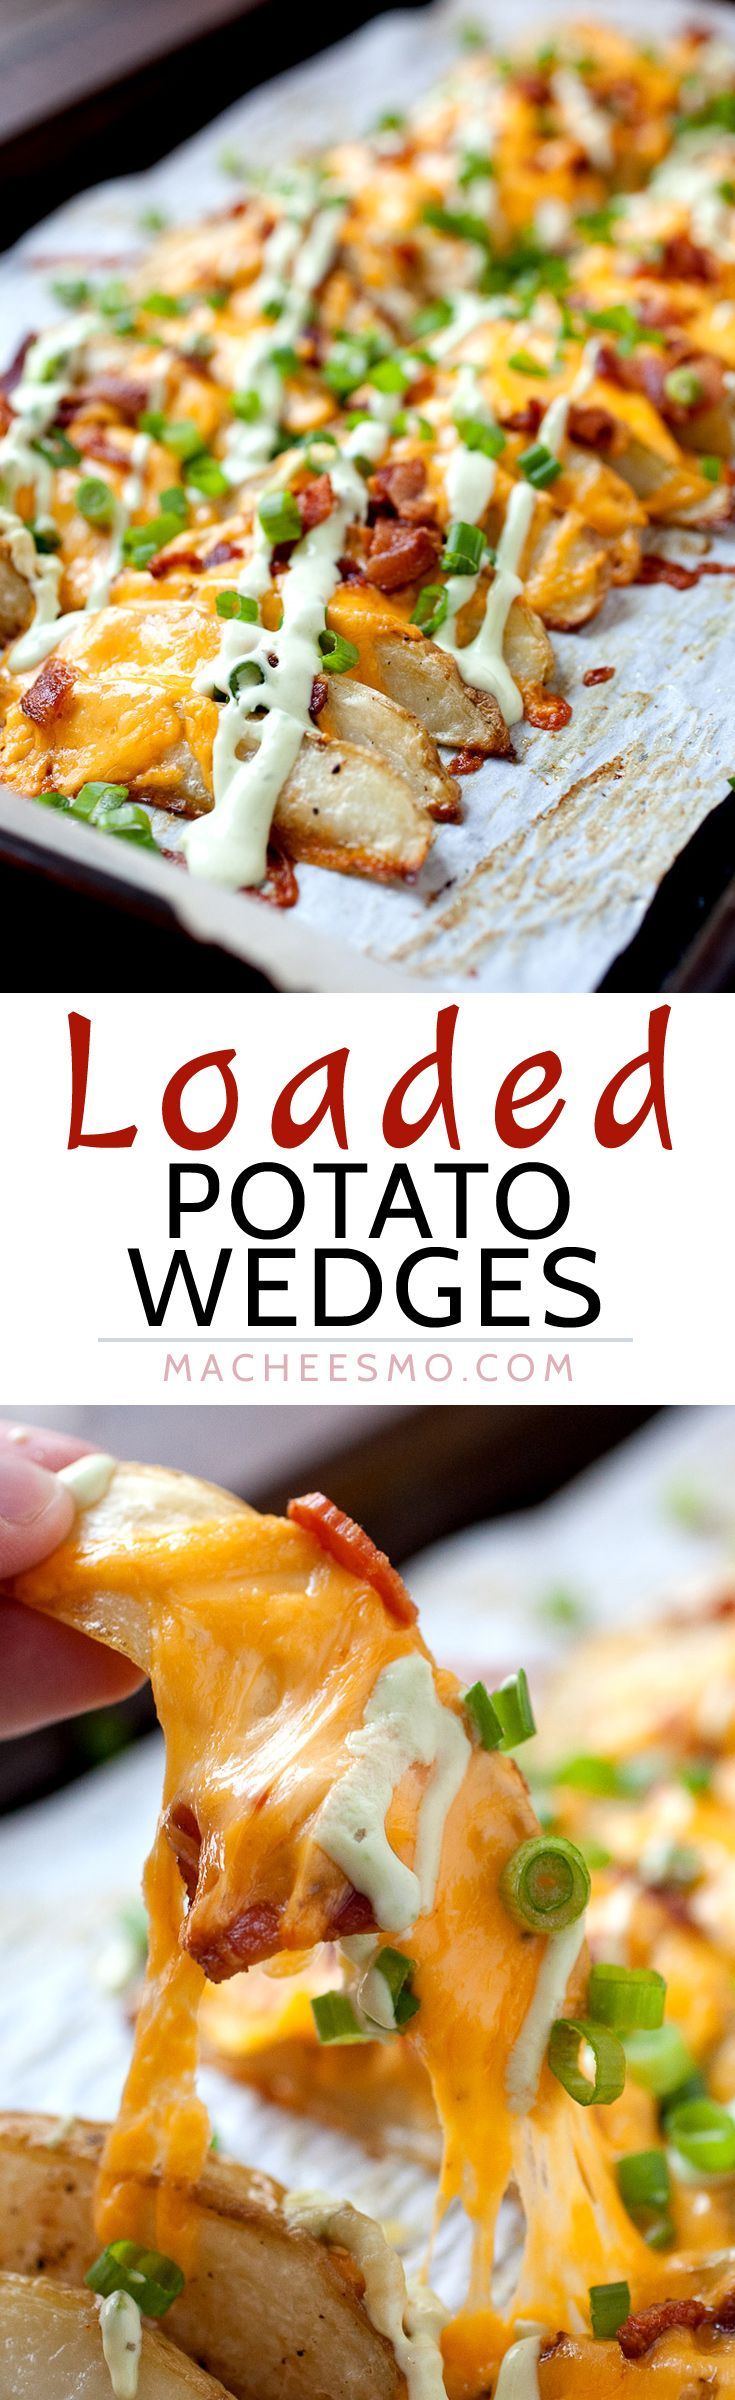 Loaded Potato Wedges – Appetizer? Side dish? Main meal? These completely loaded baked potato wedges have can be anything you want.